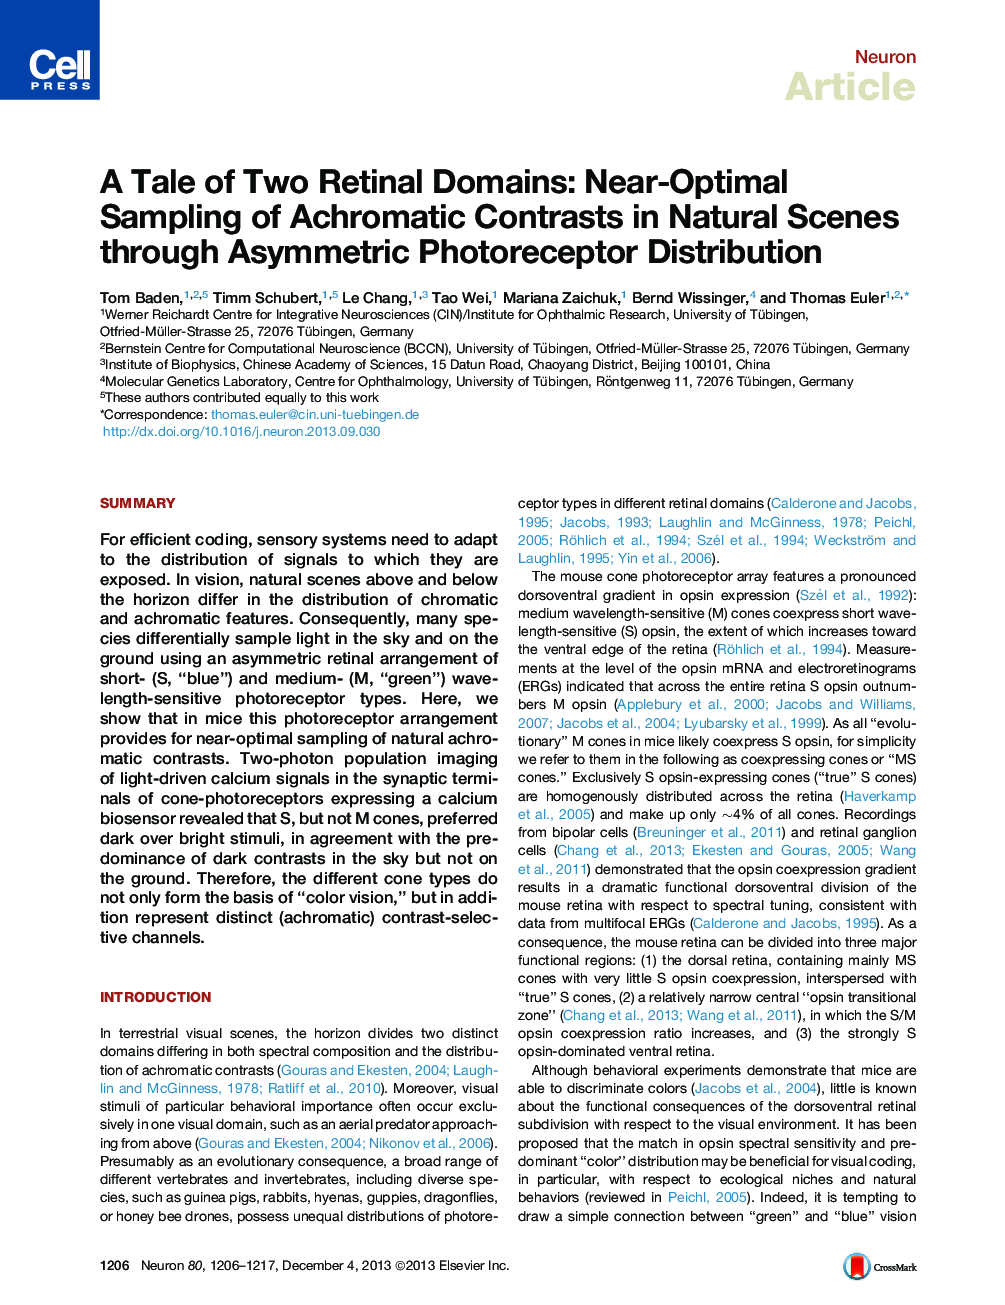 A Tale of Two Retinal Domains: Near-Optimal Sampling of Achromatic Contrasts in Natural Scenes through Asymmetric Photoreceptor Distribution